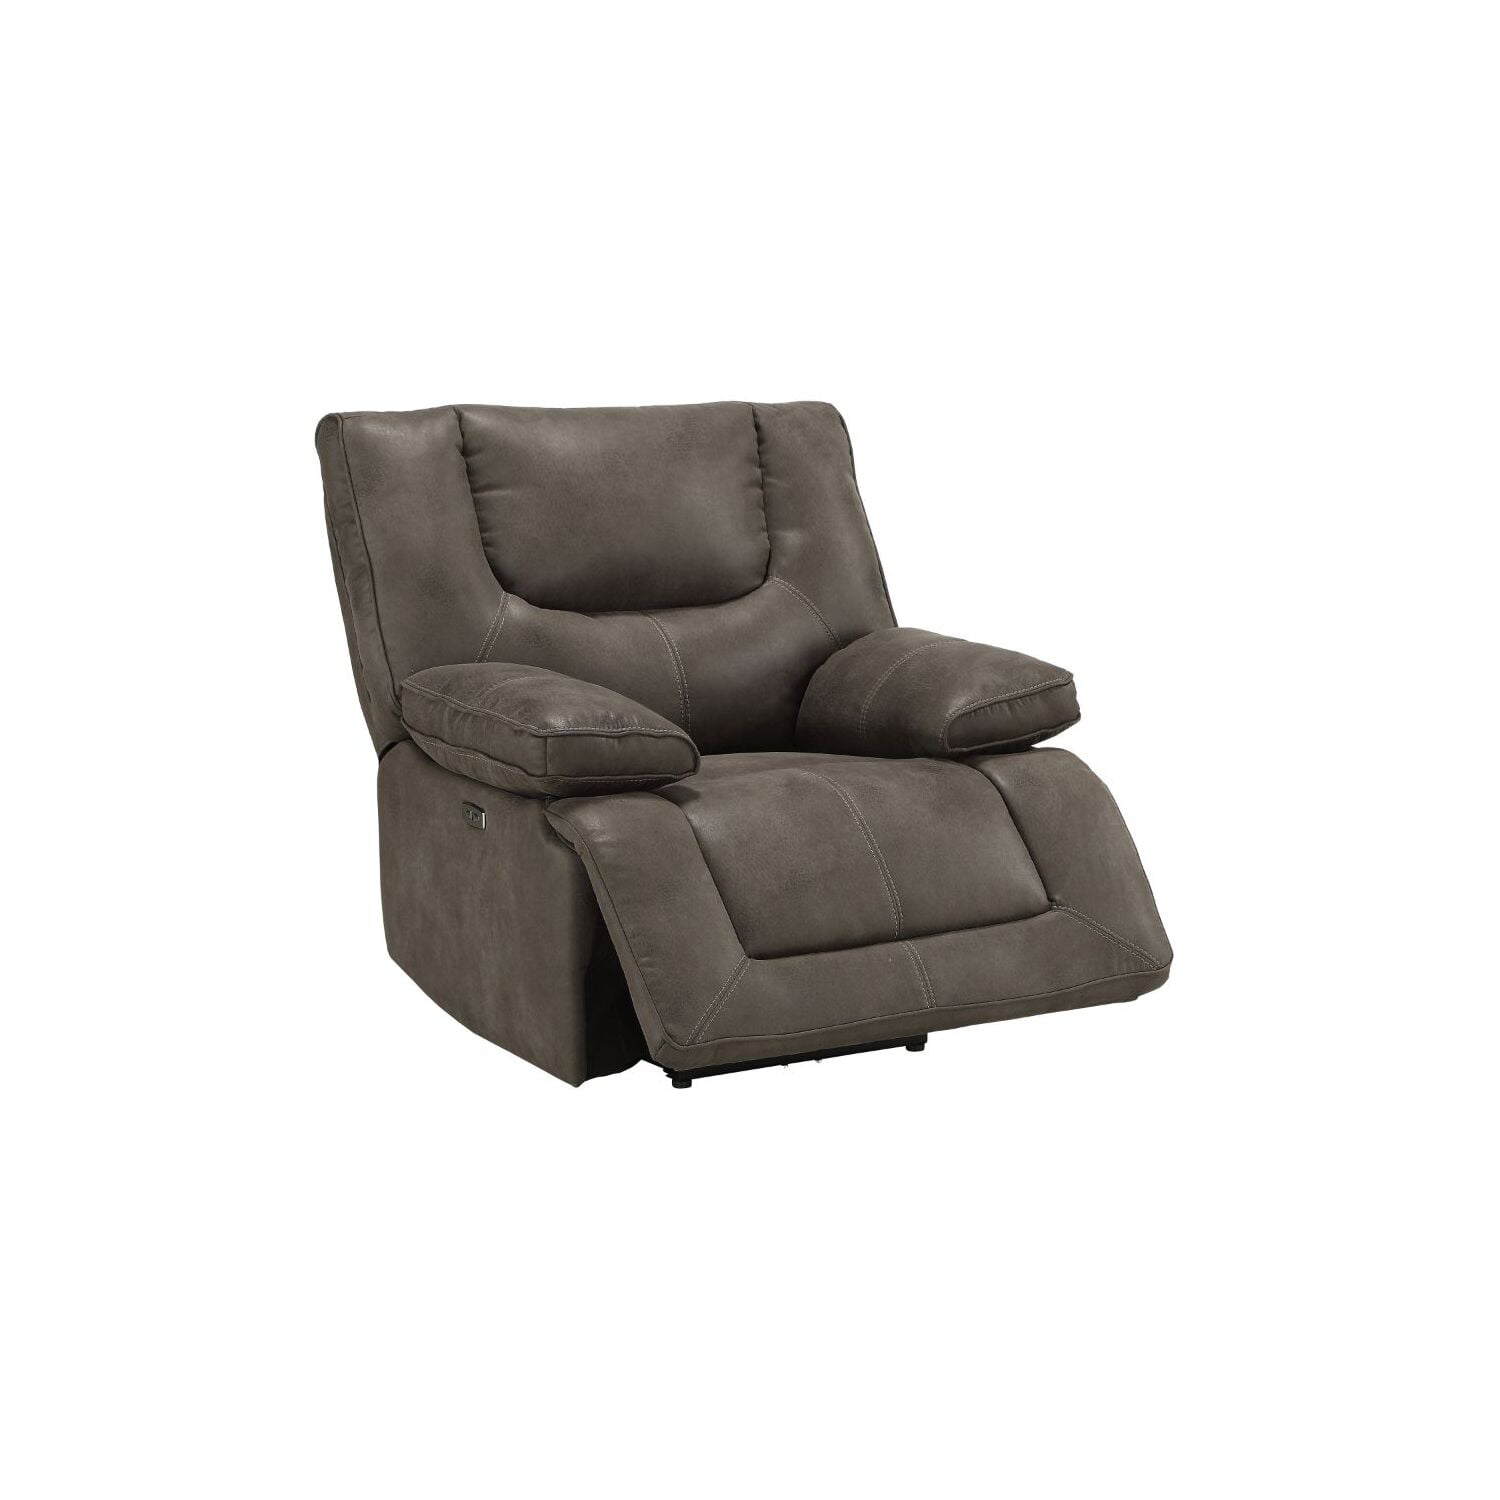 Picture of Acme Furniture 54897 41 x 40 x 40 in. Harumi Recliner with USB Port, Gray Fabric